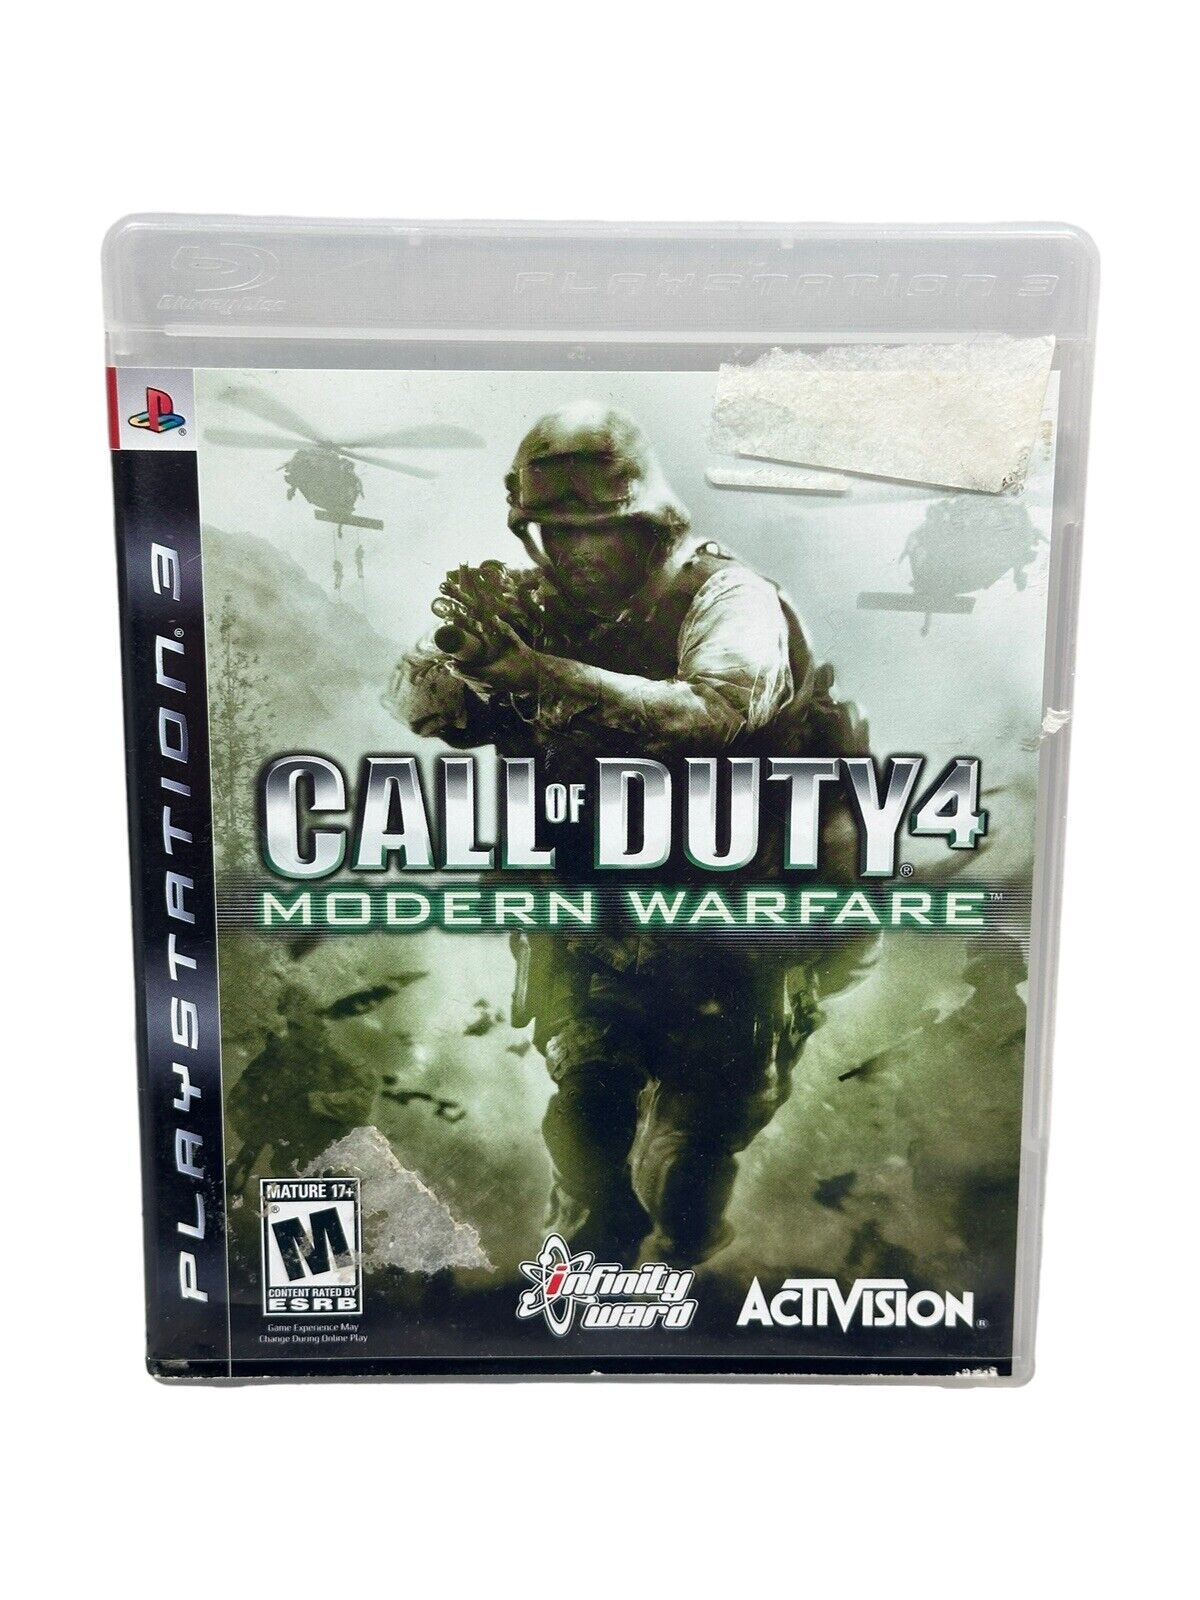 Call of Duty 4: Modern Warfare (Sony PlayStation 3, 2007) PS3 Complete Tested